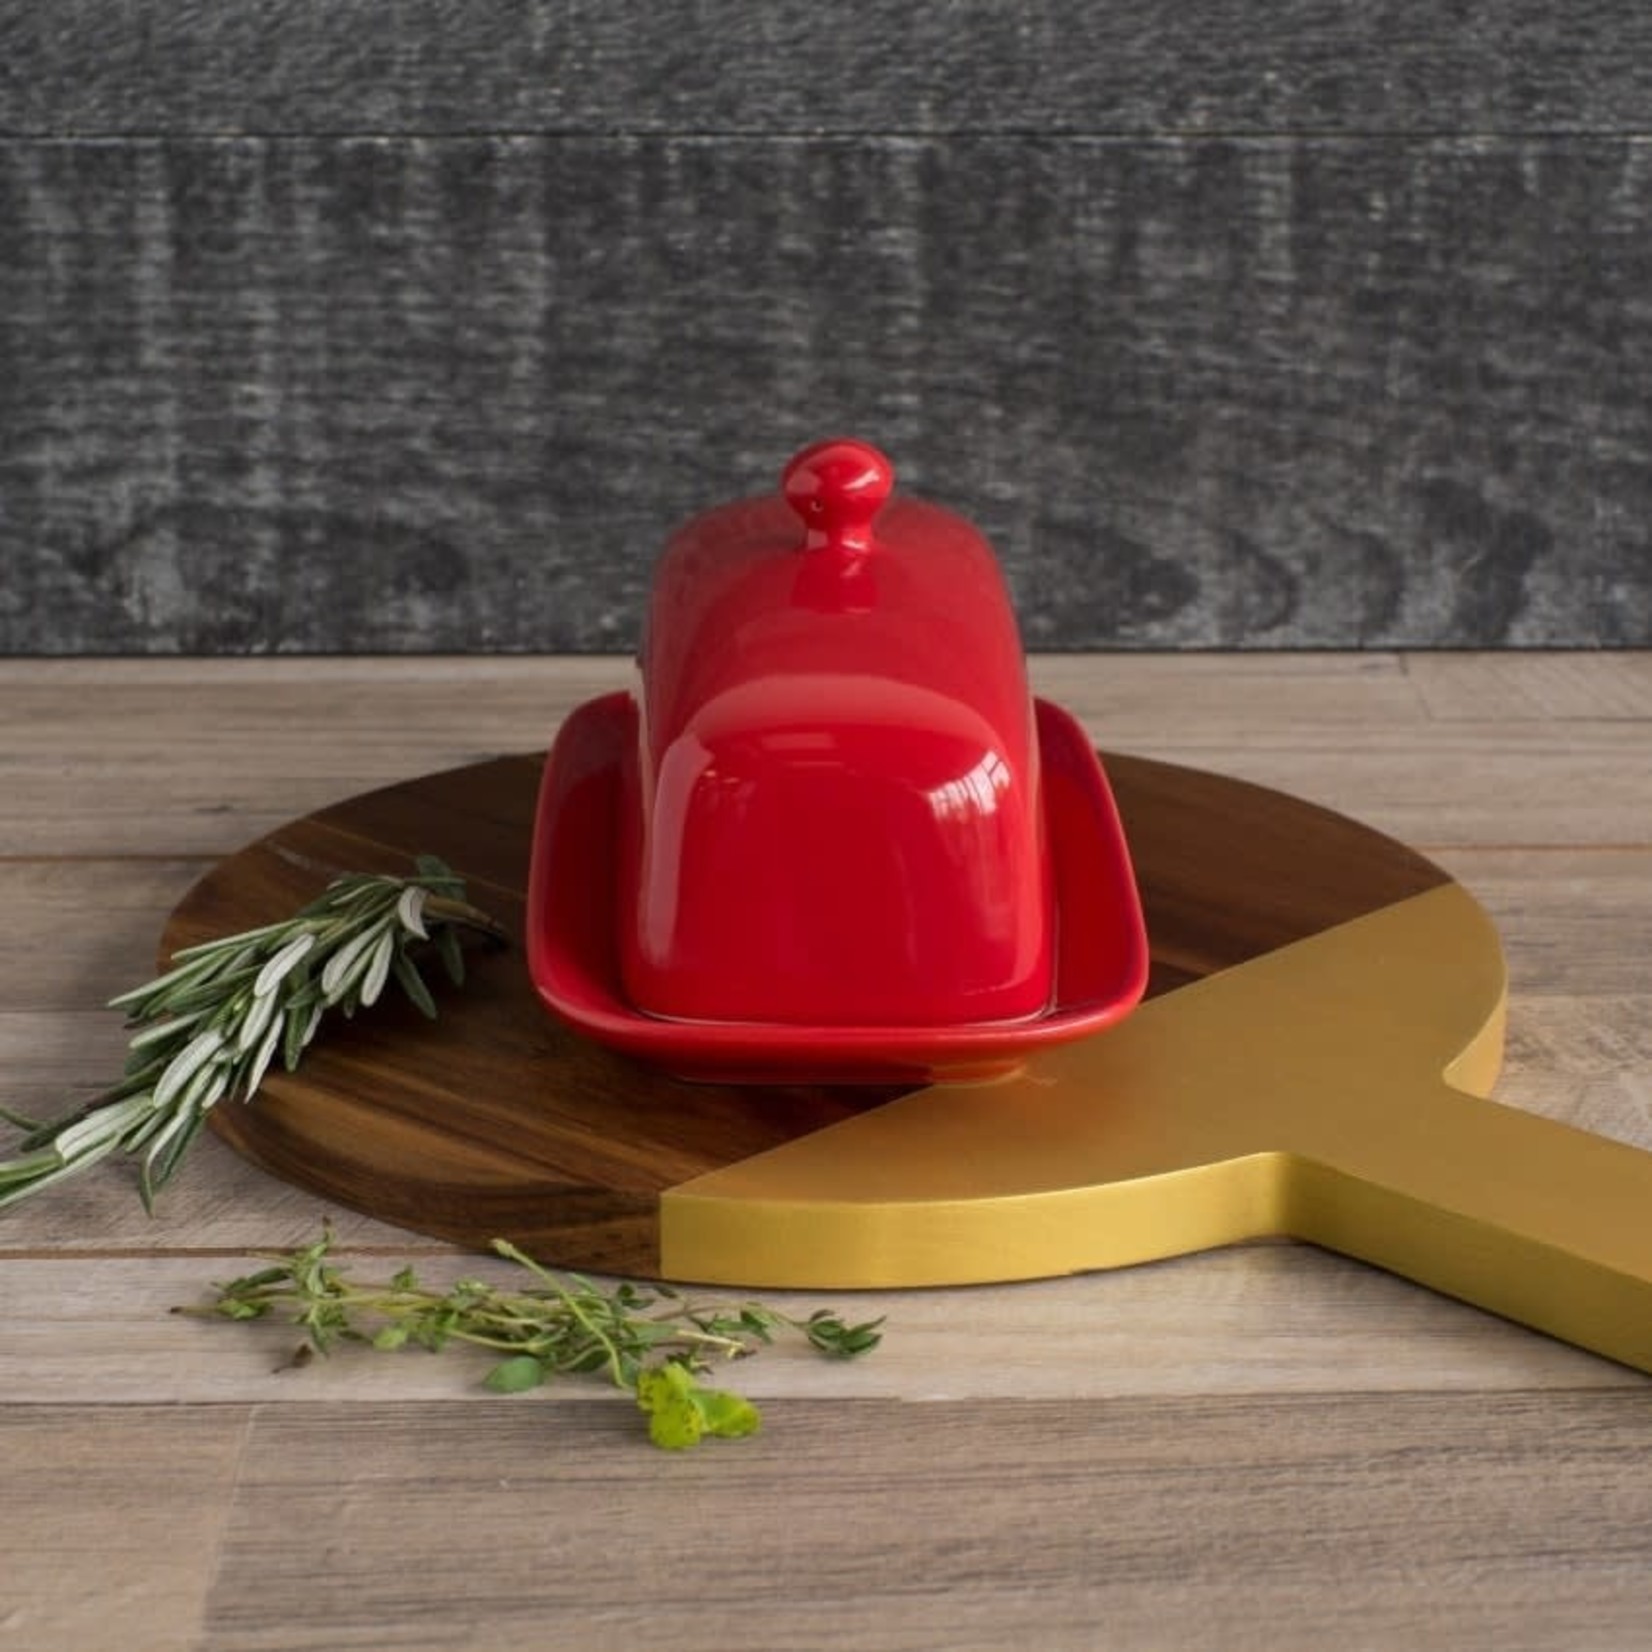 NOW DESIGNS NOW DESIGNS Rectangular Butter Dish - Red